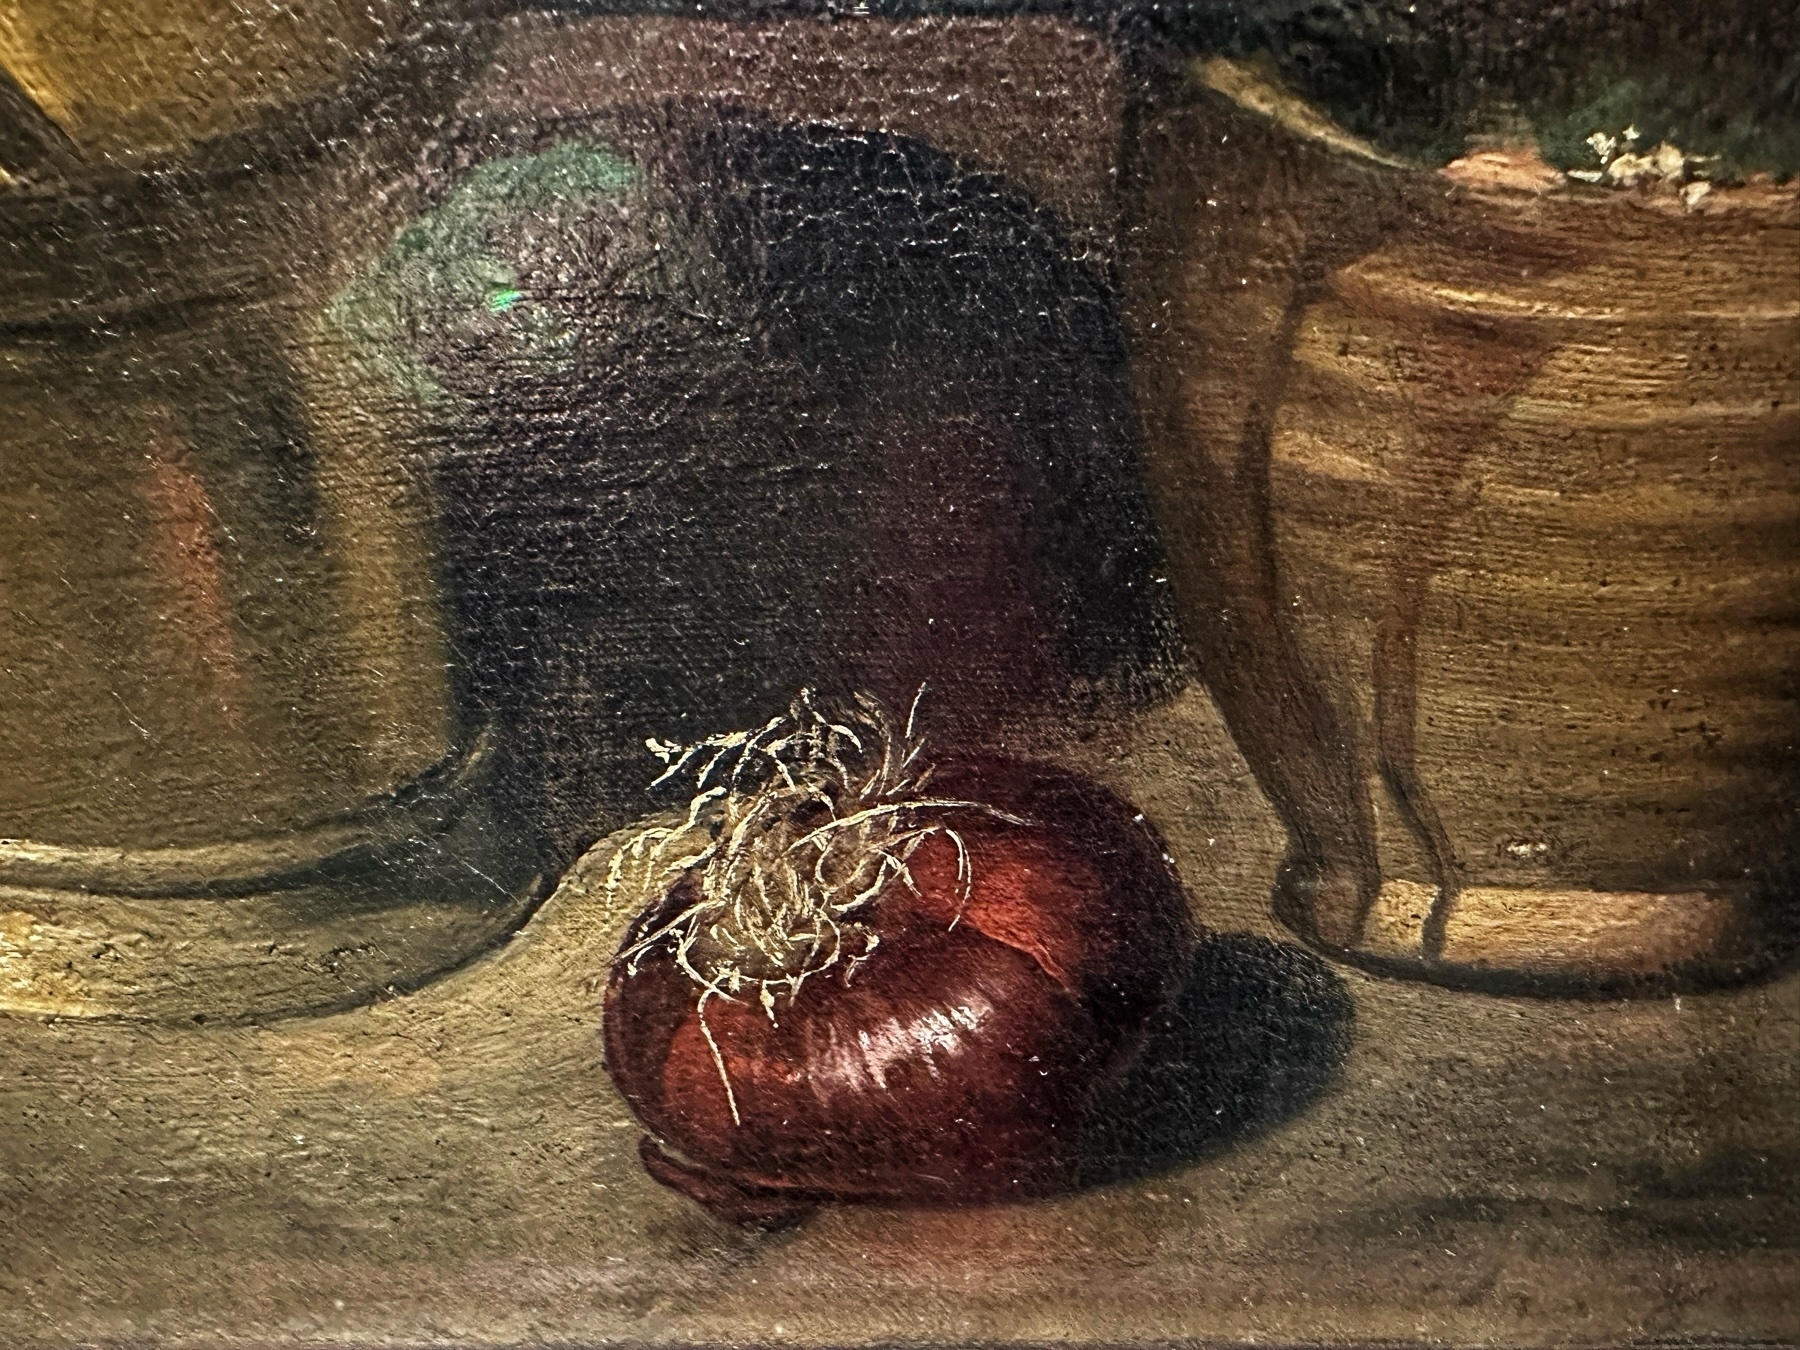 Oil painting close-up of a red onion with roots on a wooden surface, against a dark background with partially visible earthenware vessels.